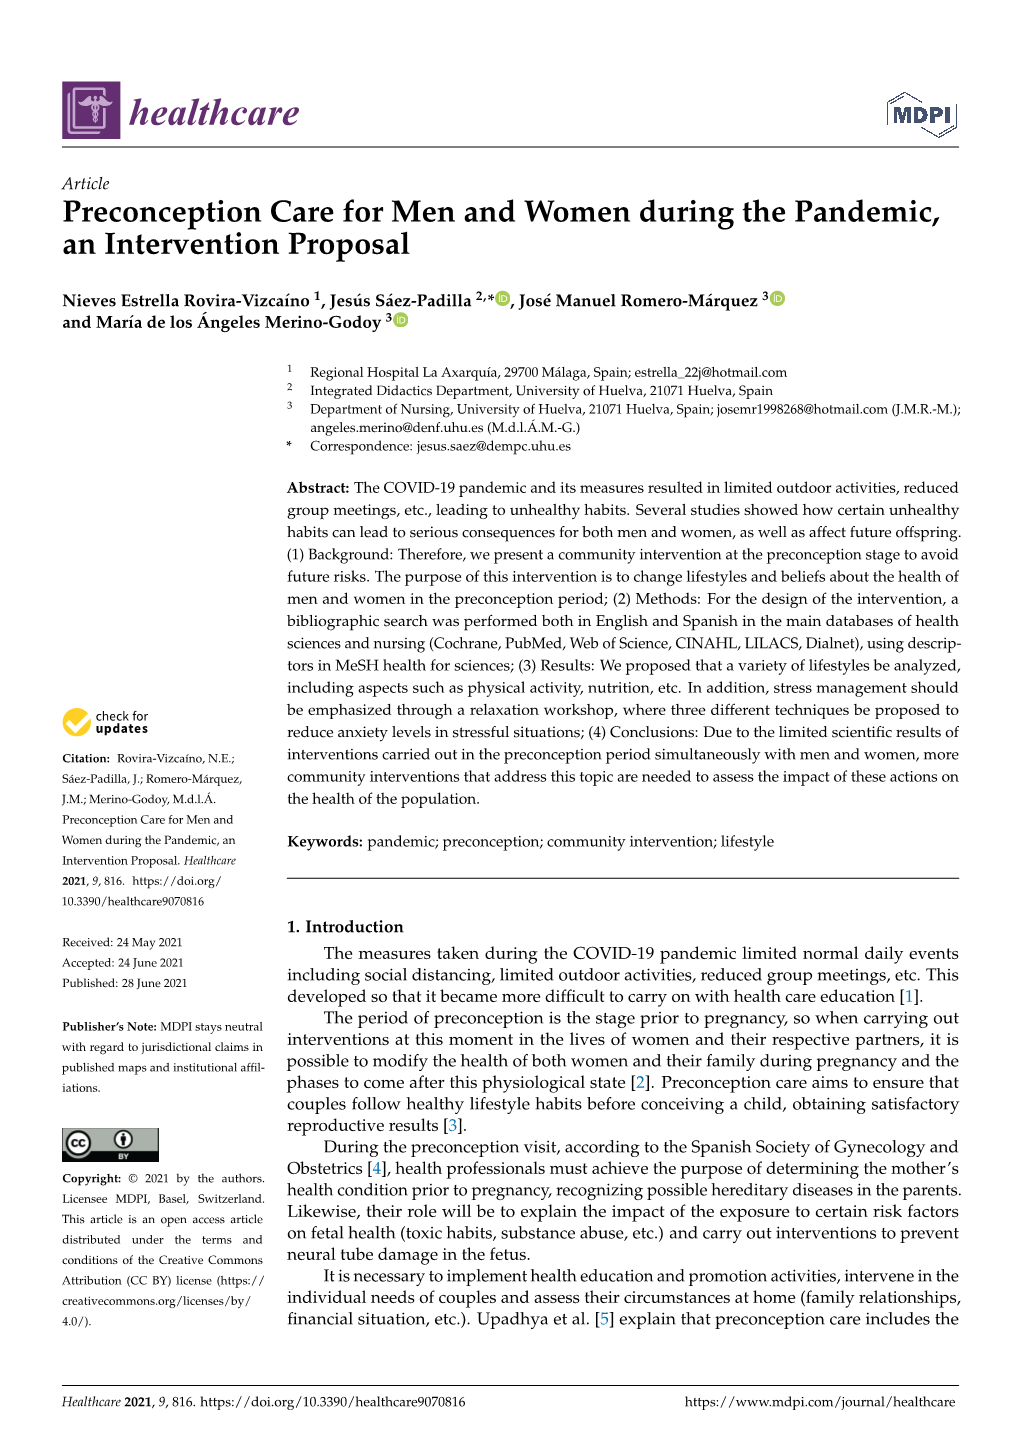 Preconception Care for Men and Women During the Pandemic, an Intervention Proposal